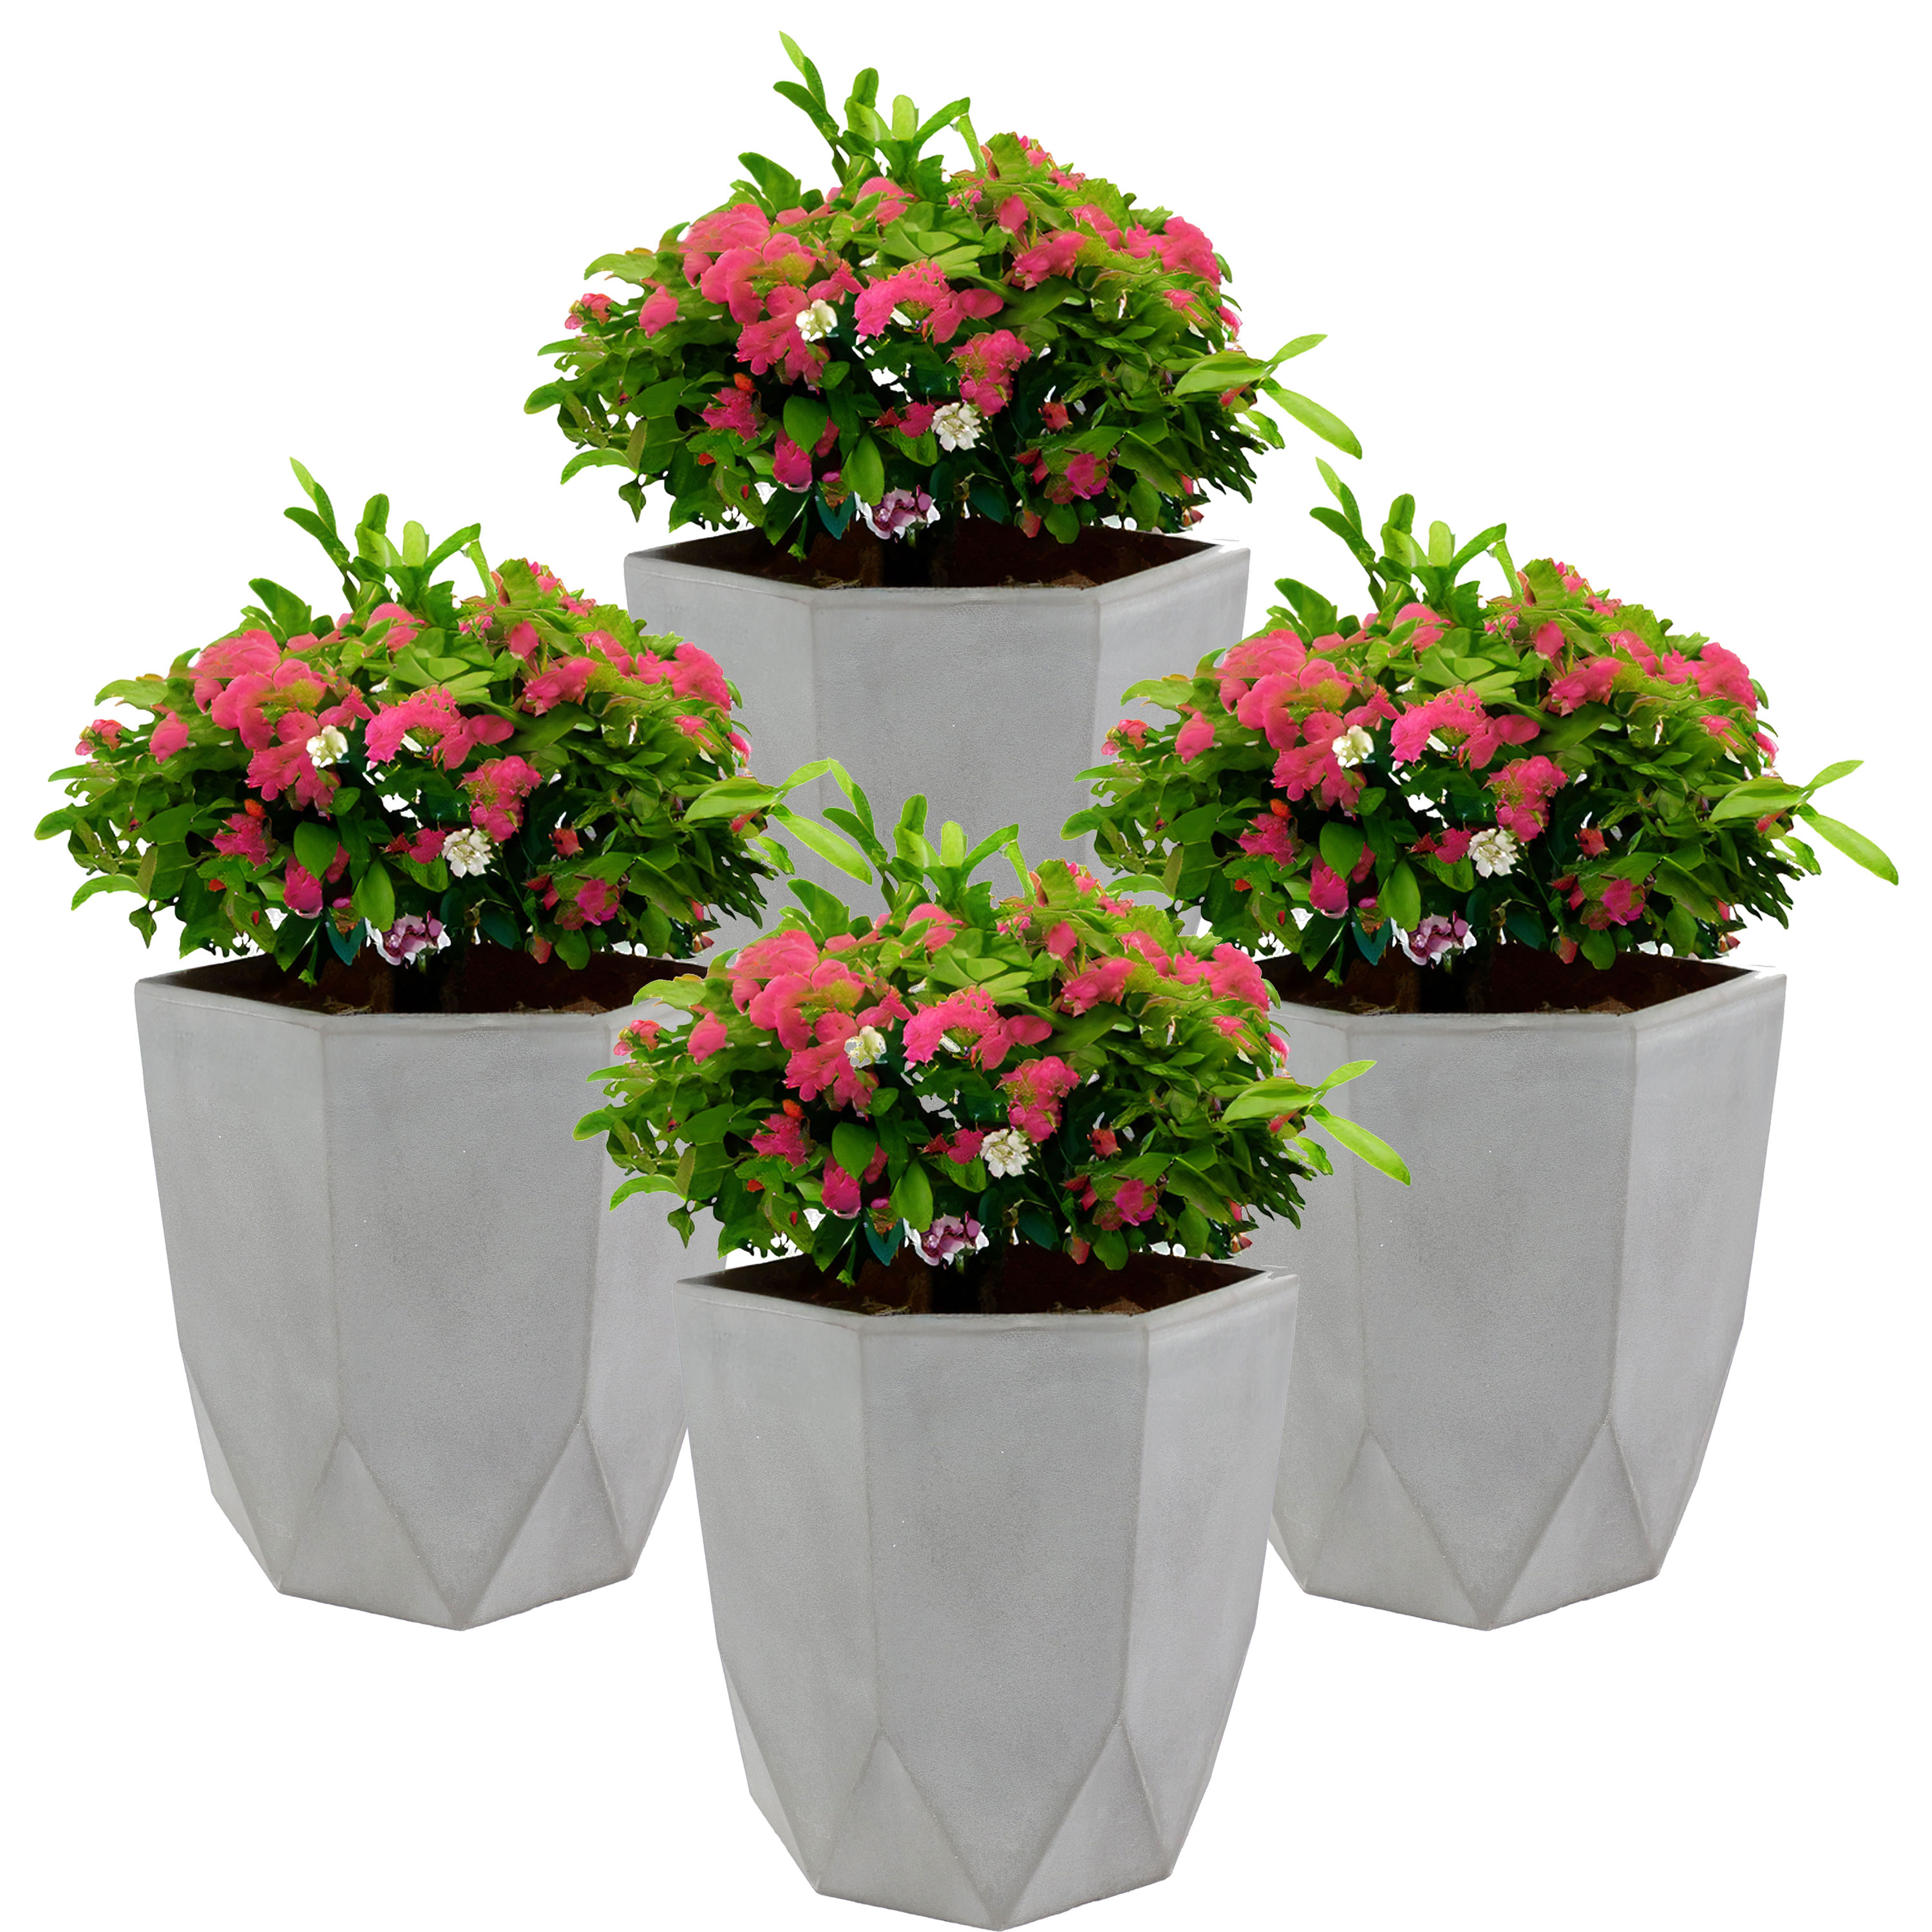 14.75 in Modern Faceted Outdoor Planter - Gray - Set of 4